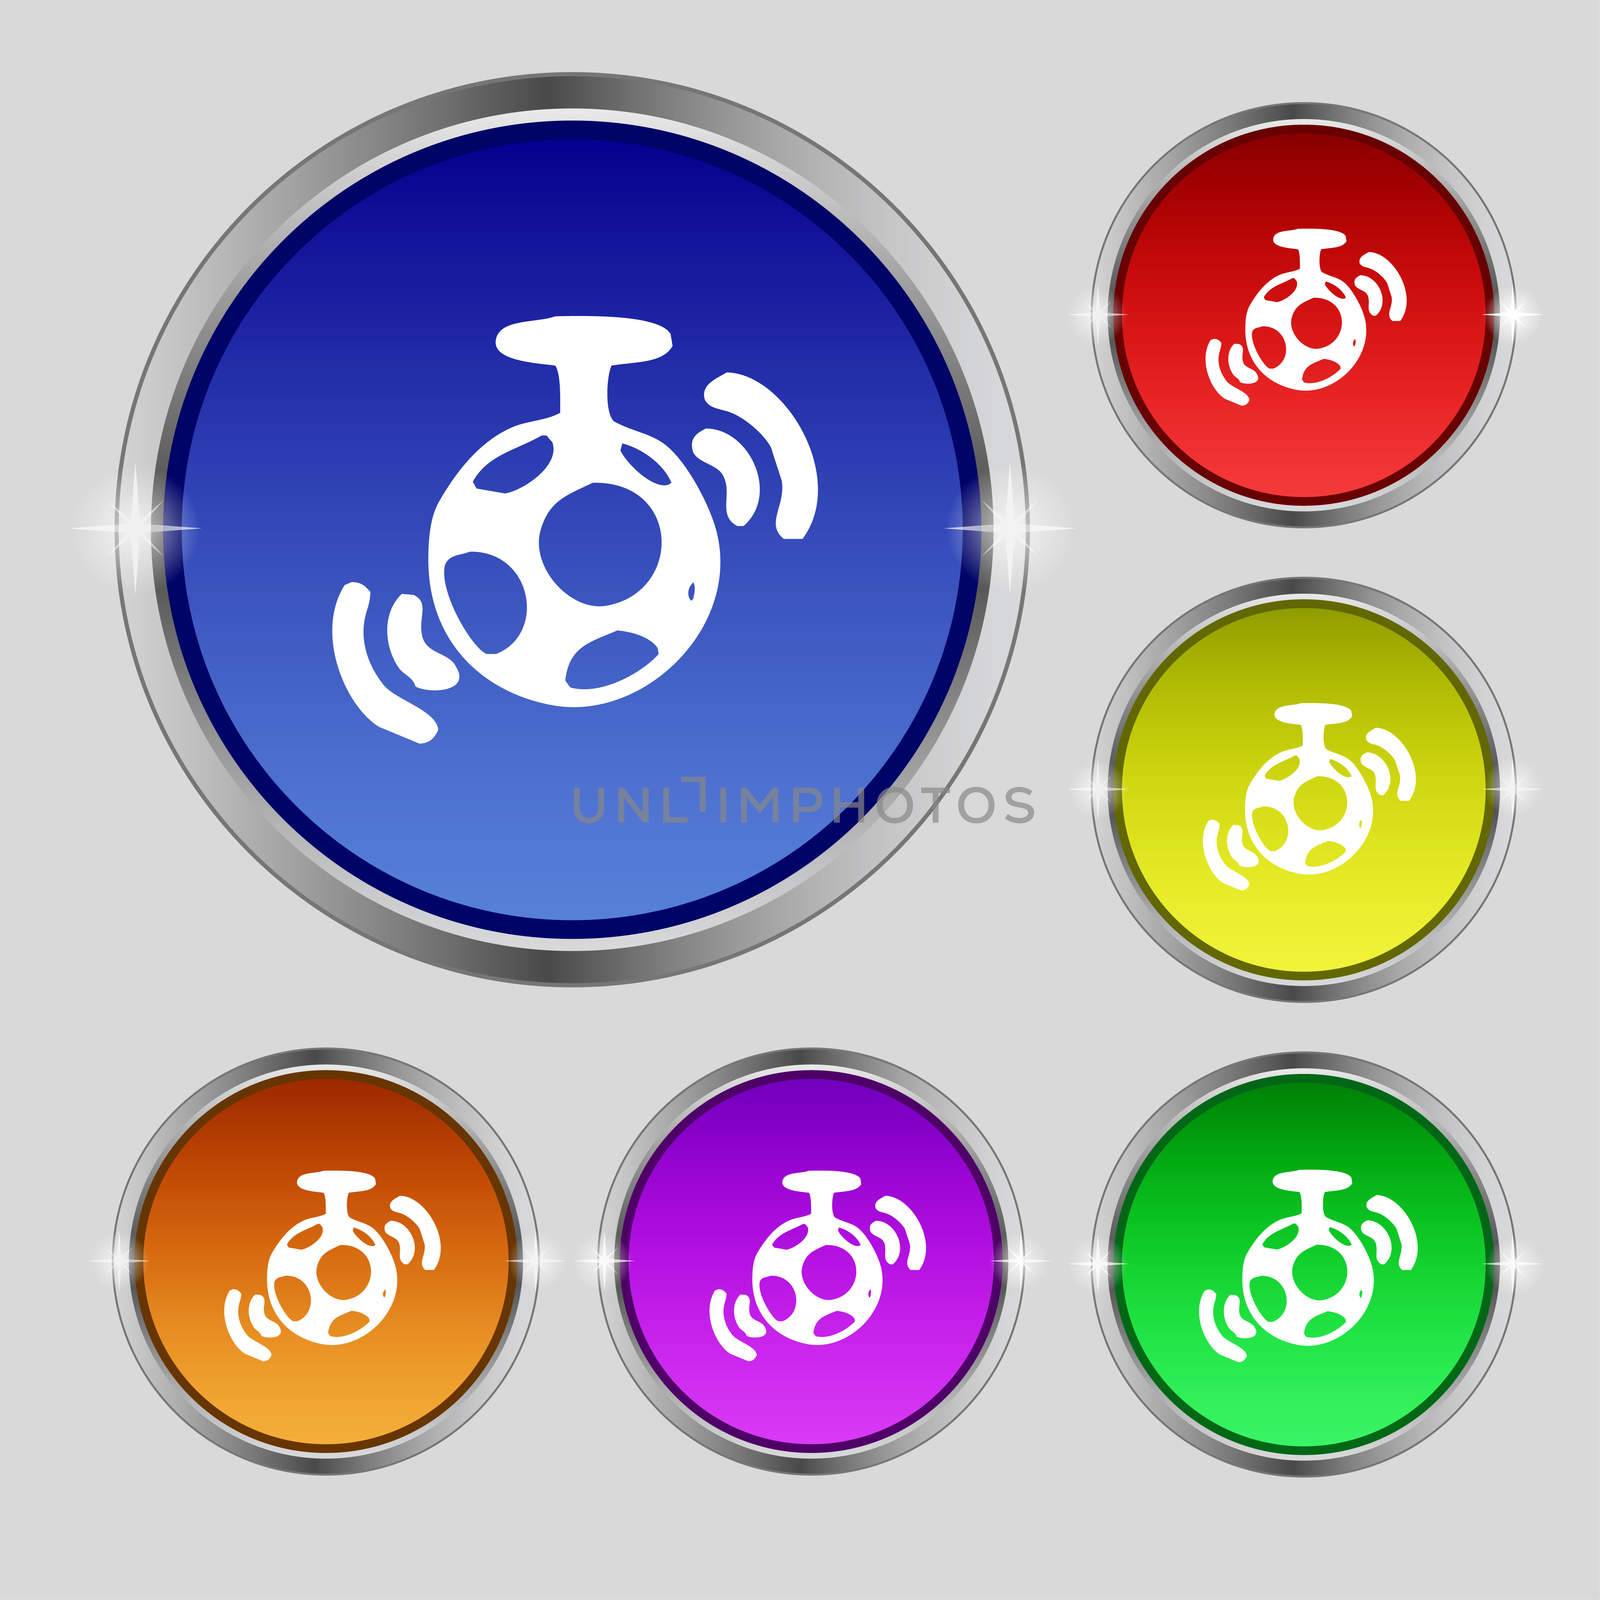 mirror ball disco icon sign. Round symbol on bright colourful buttons.  by serhii_lohvyniuk